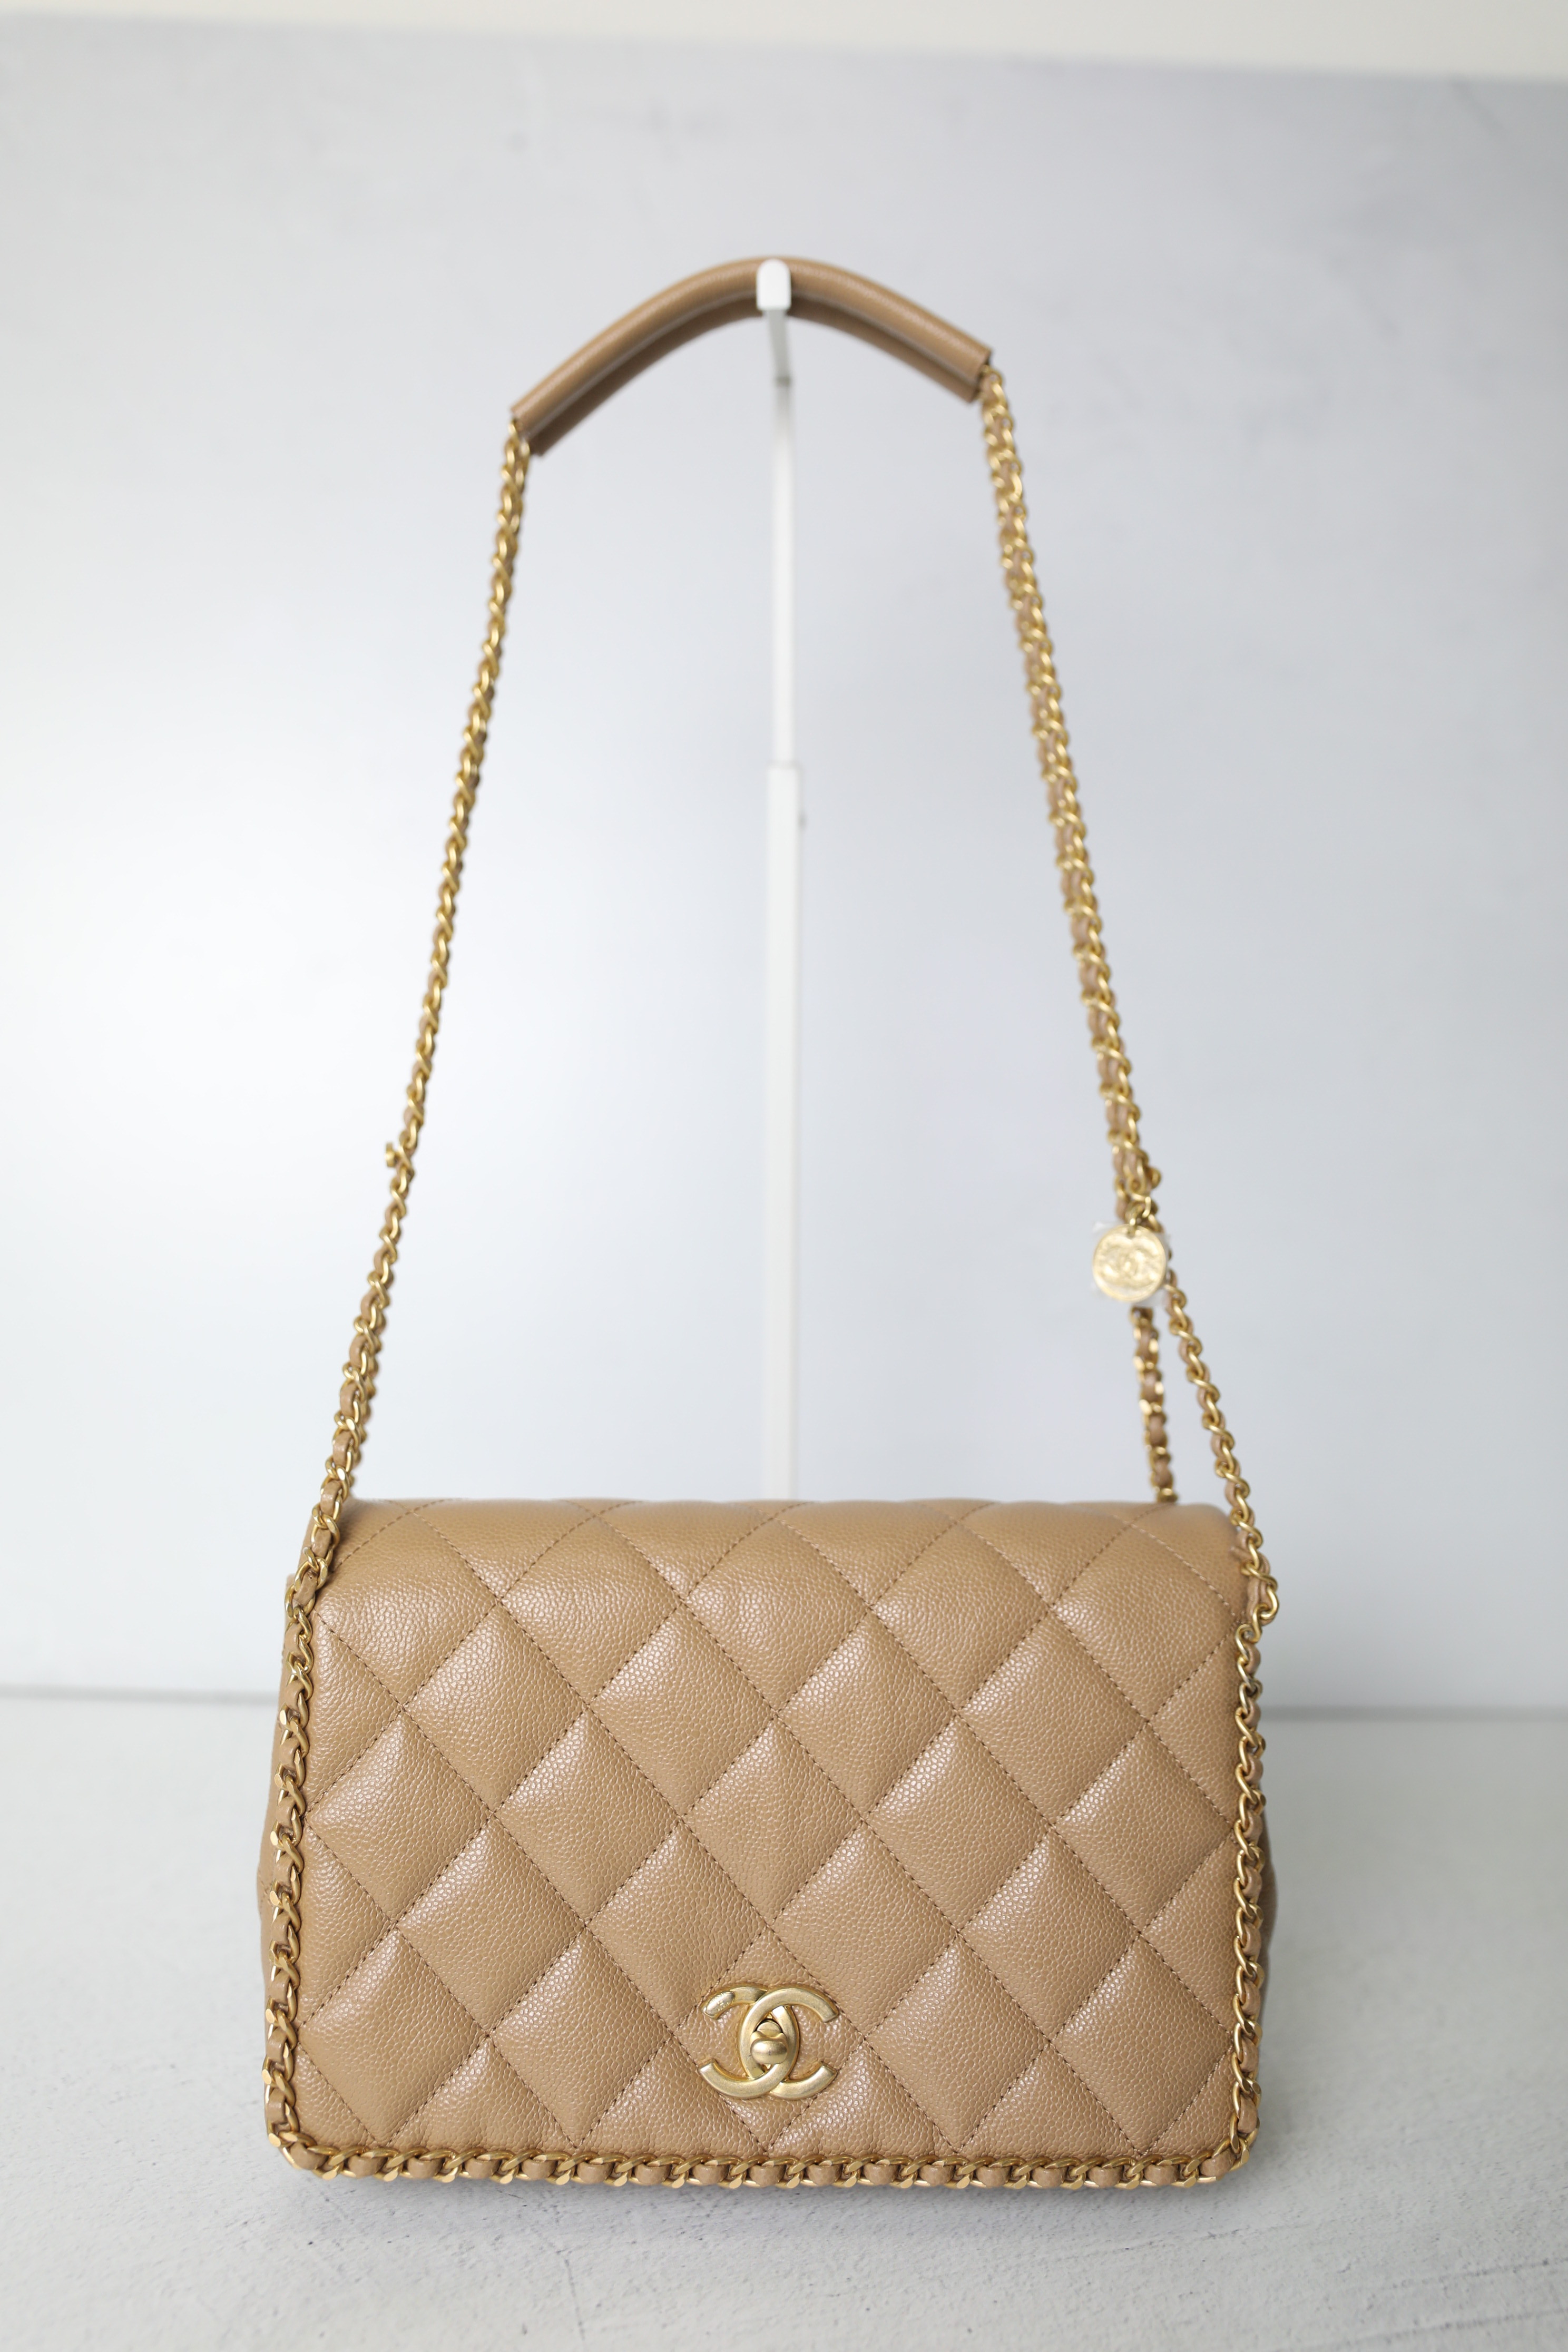 CHANEL 2.55 Reissue 225 Double Flap Timeless Quilted Handbag Gold